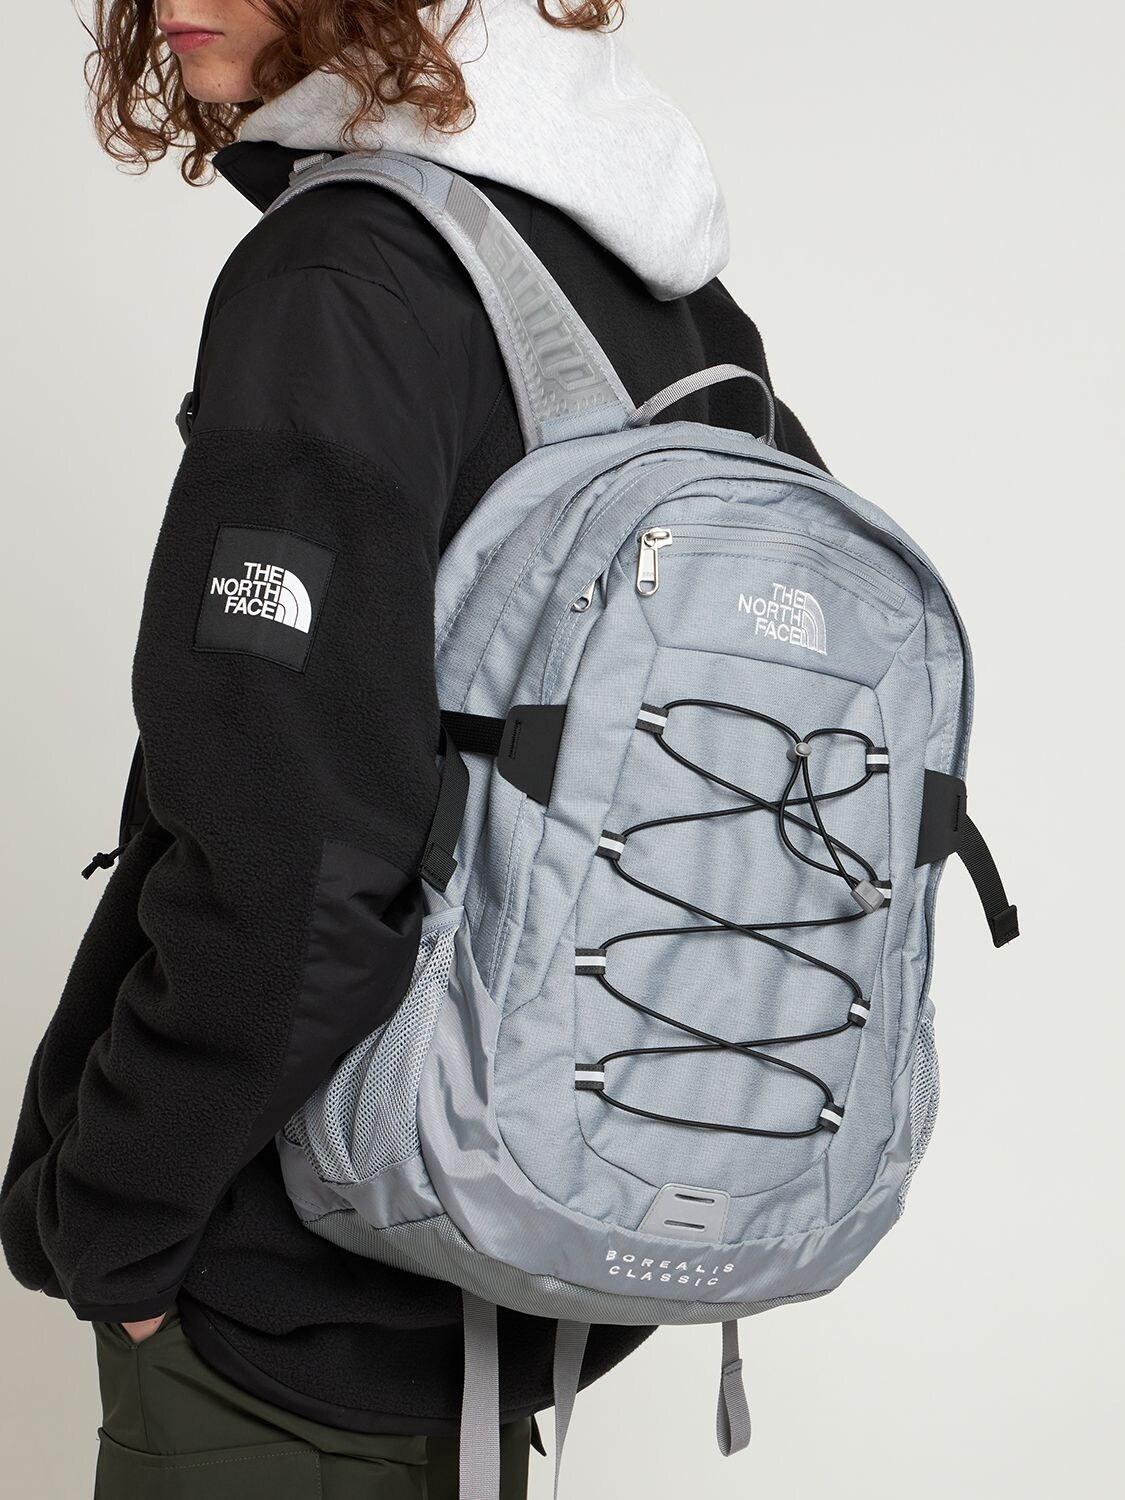 The North Face 29l Borealis Classic Nylon Backpack in Gray | Lyst